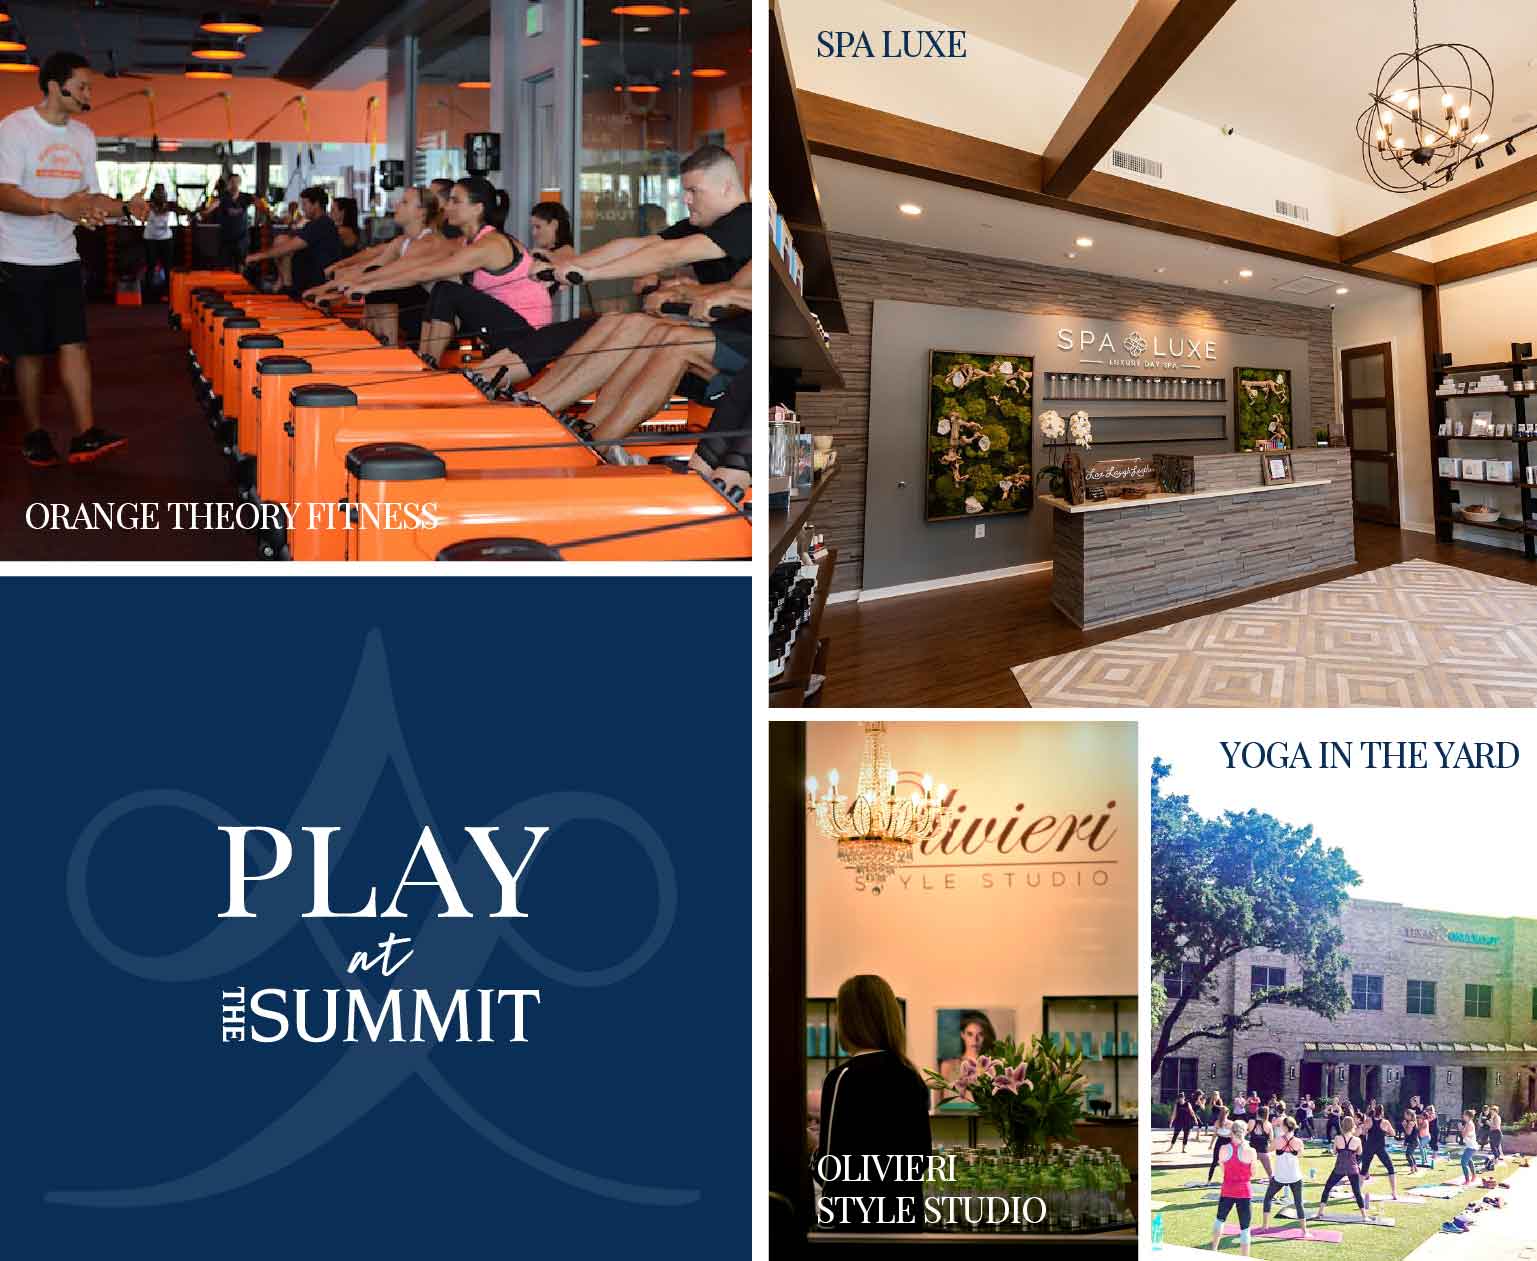 Olivieri Style Studio, Orange Theory Gym, Spa Luxe Massage Facials Manicures Pedicures at The Summit at Rivery Park